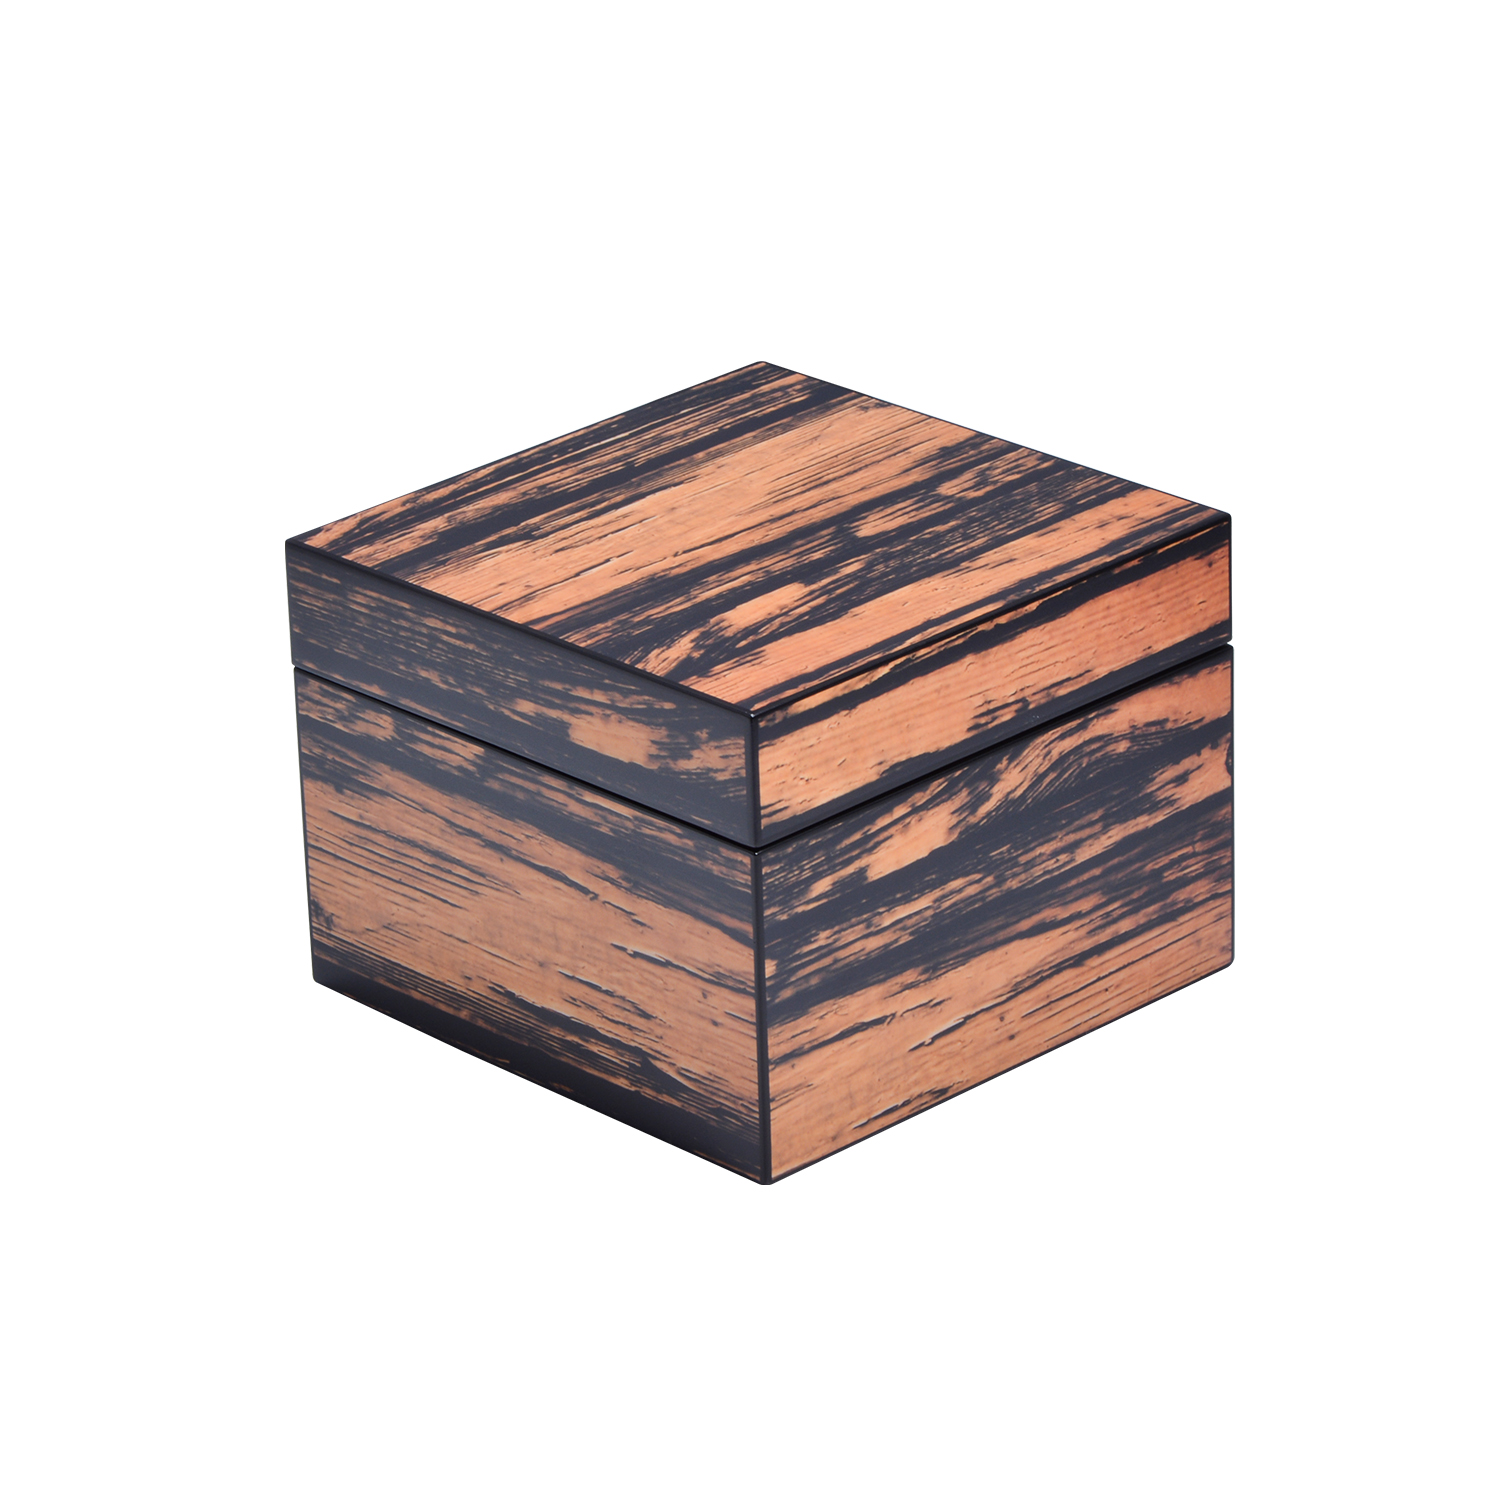 Latest Wholesale Wooden Packing Box MDF Box Wooden Gift Box 9